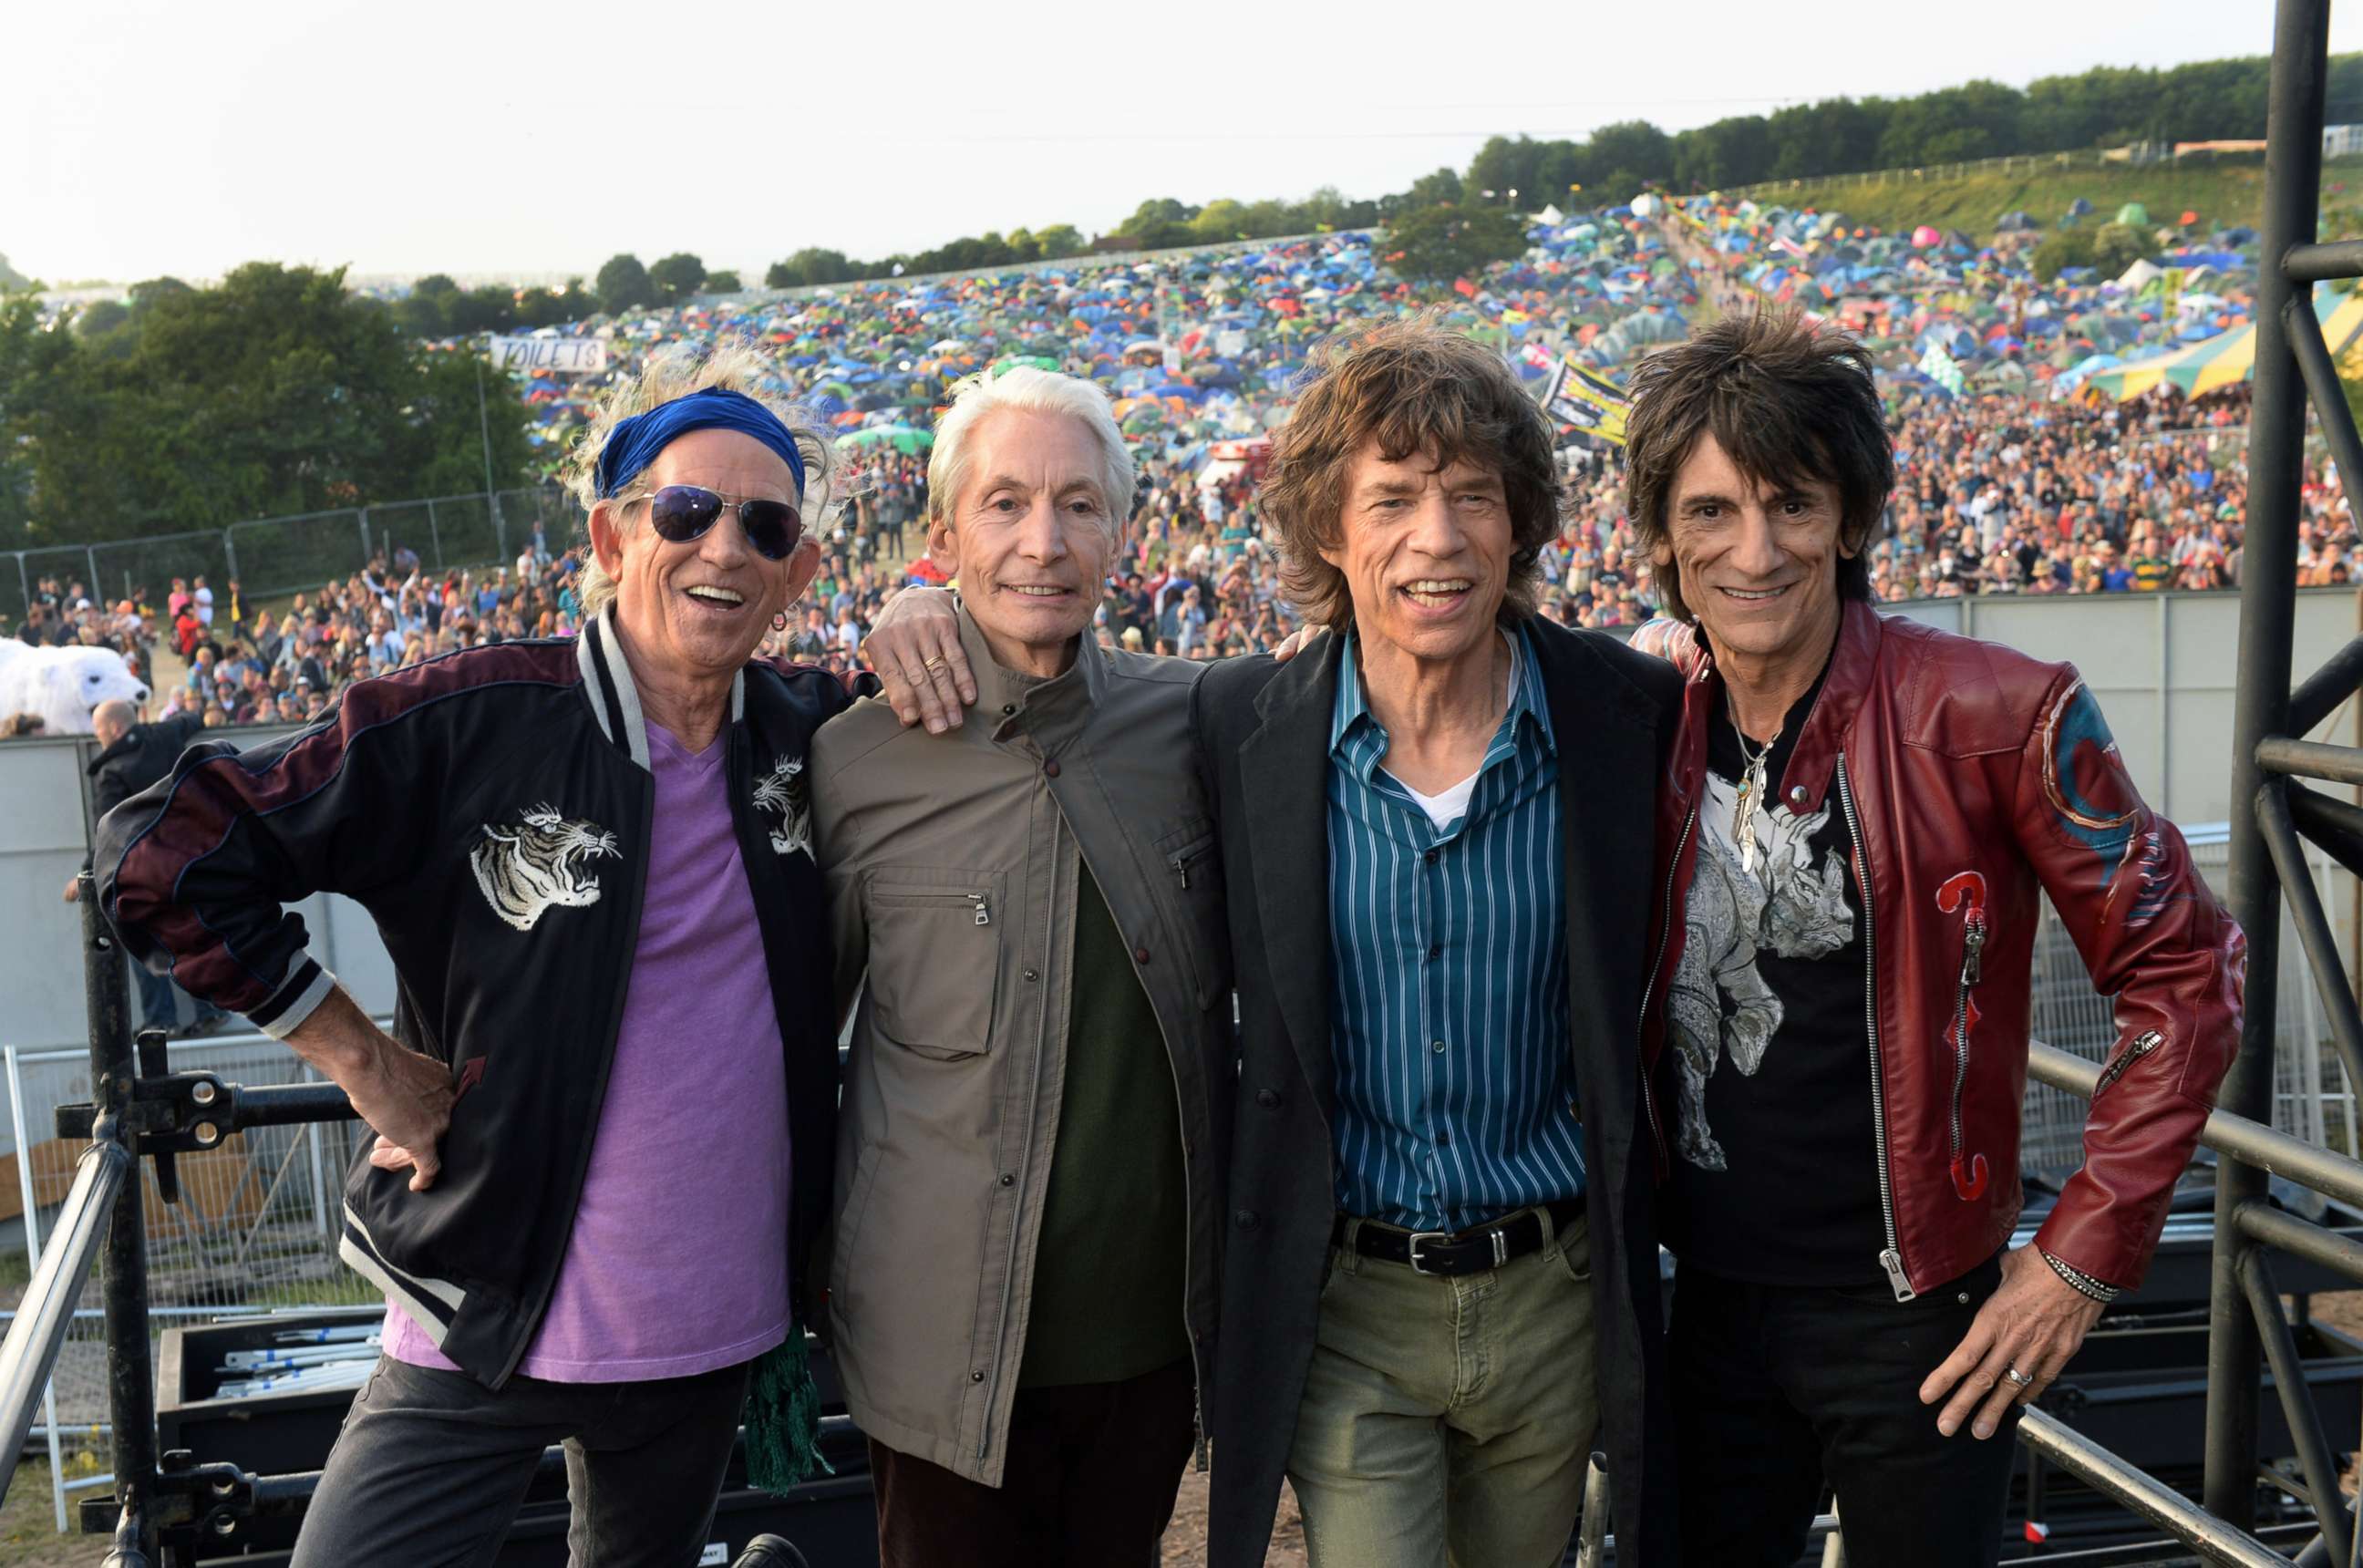 PHOTO: From left, Keith Richards, Charlie Watts, Mick Jagger and Ronnie Wood of The Rolling Stones pose backstage before their headlining performance at the 2013 Glastonbury Festival at Worthy Farm, June 29, 2013, in Glastonbury, England.